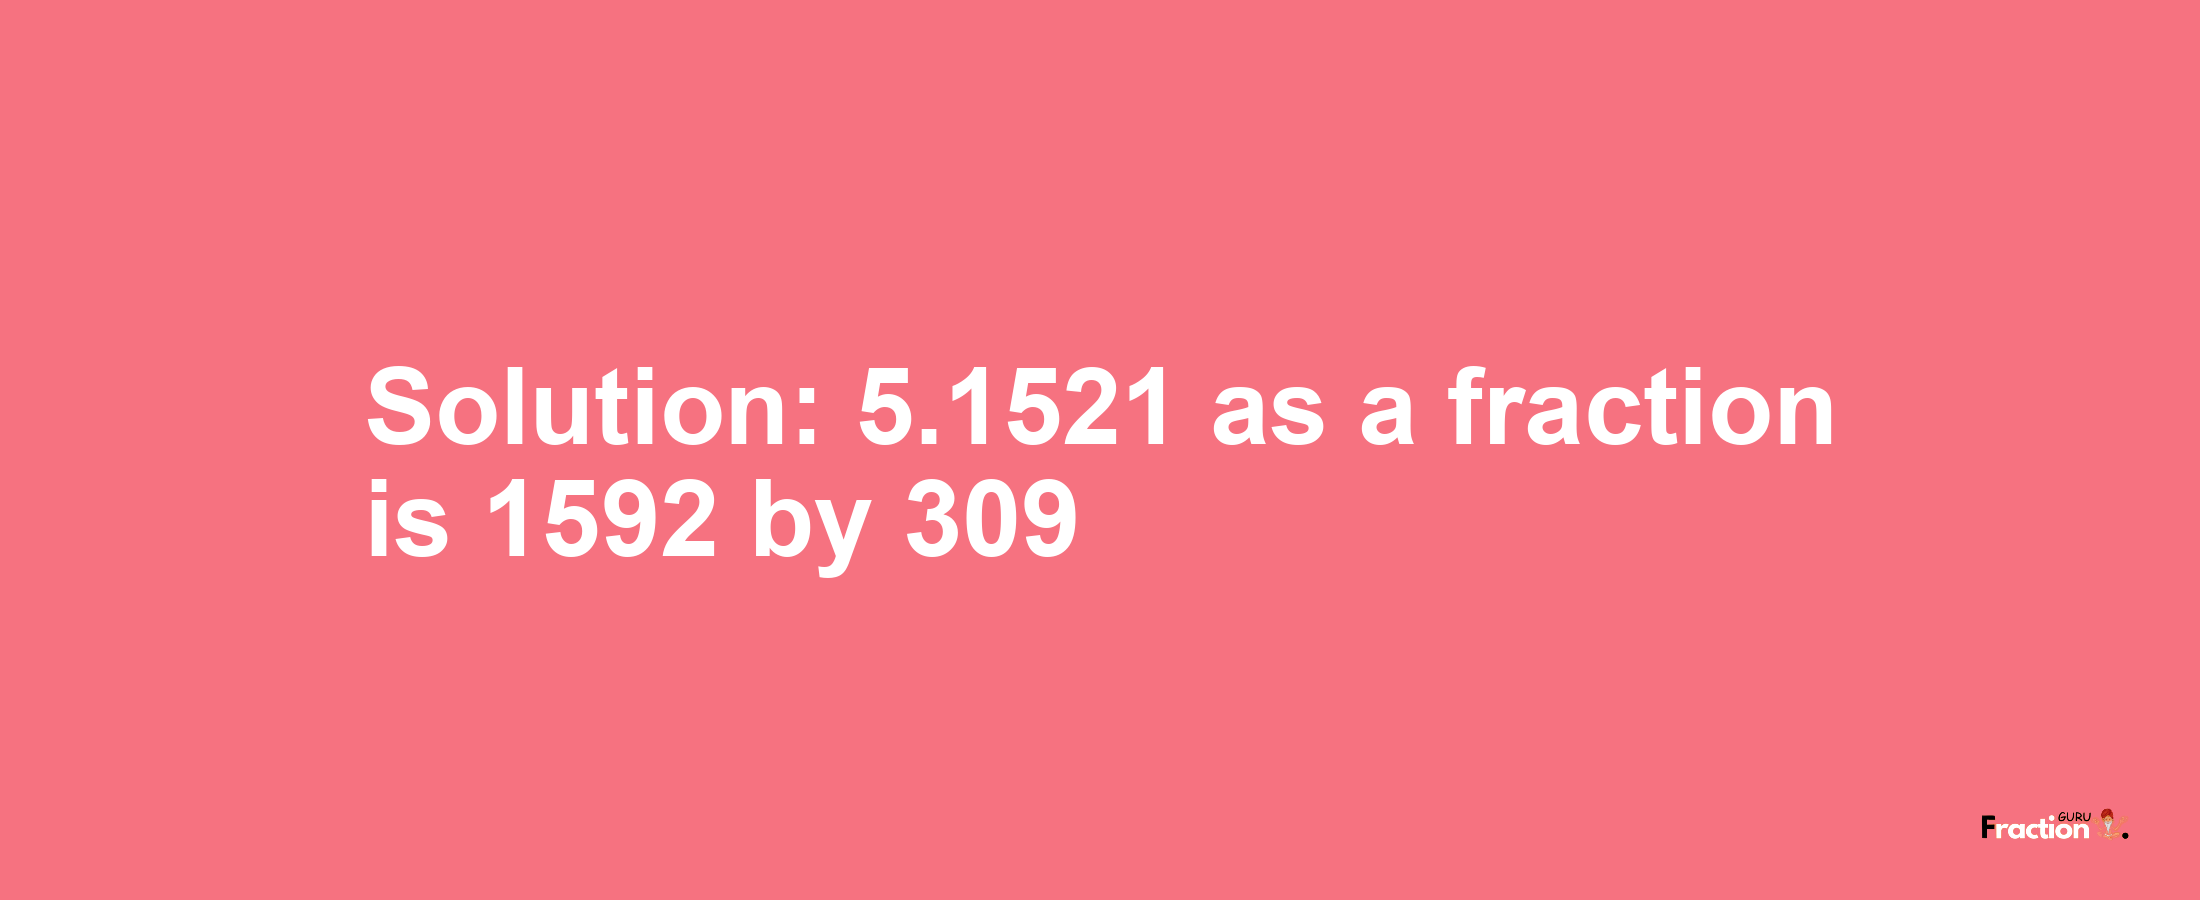 Solution:5.1521 as a fraction is 1592/309